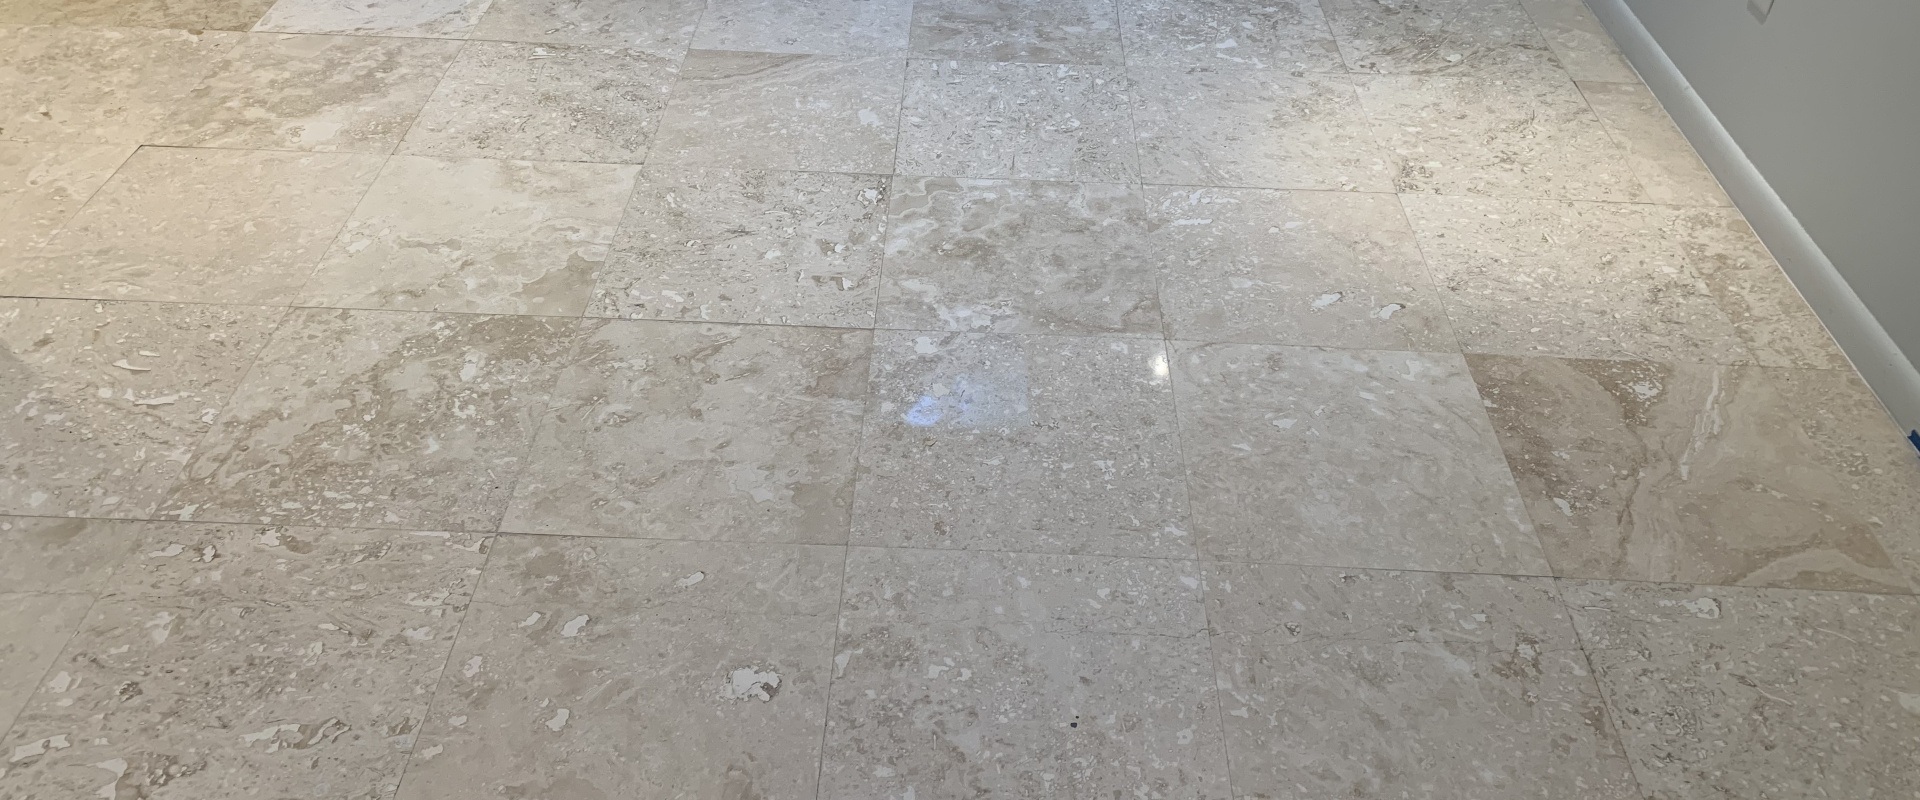 Travertine Cleaning & Polishing Services near Colleyville, Texas